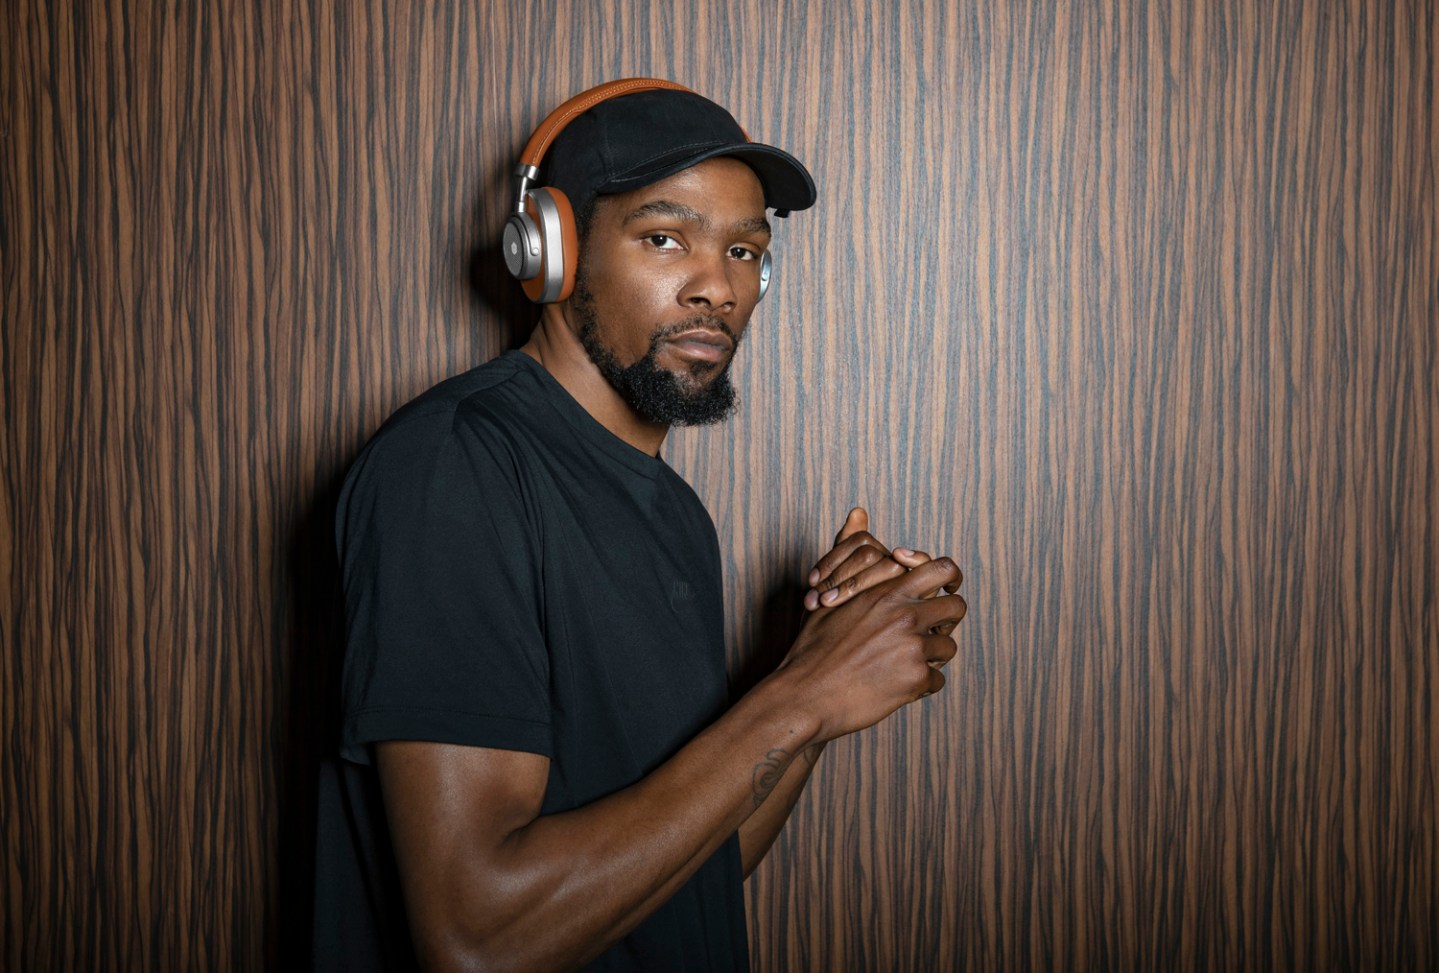 Kevin Durant Wears MW65 Active Noise-Cancelling Wireless Headphones